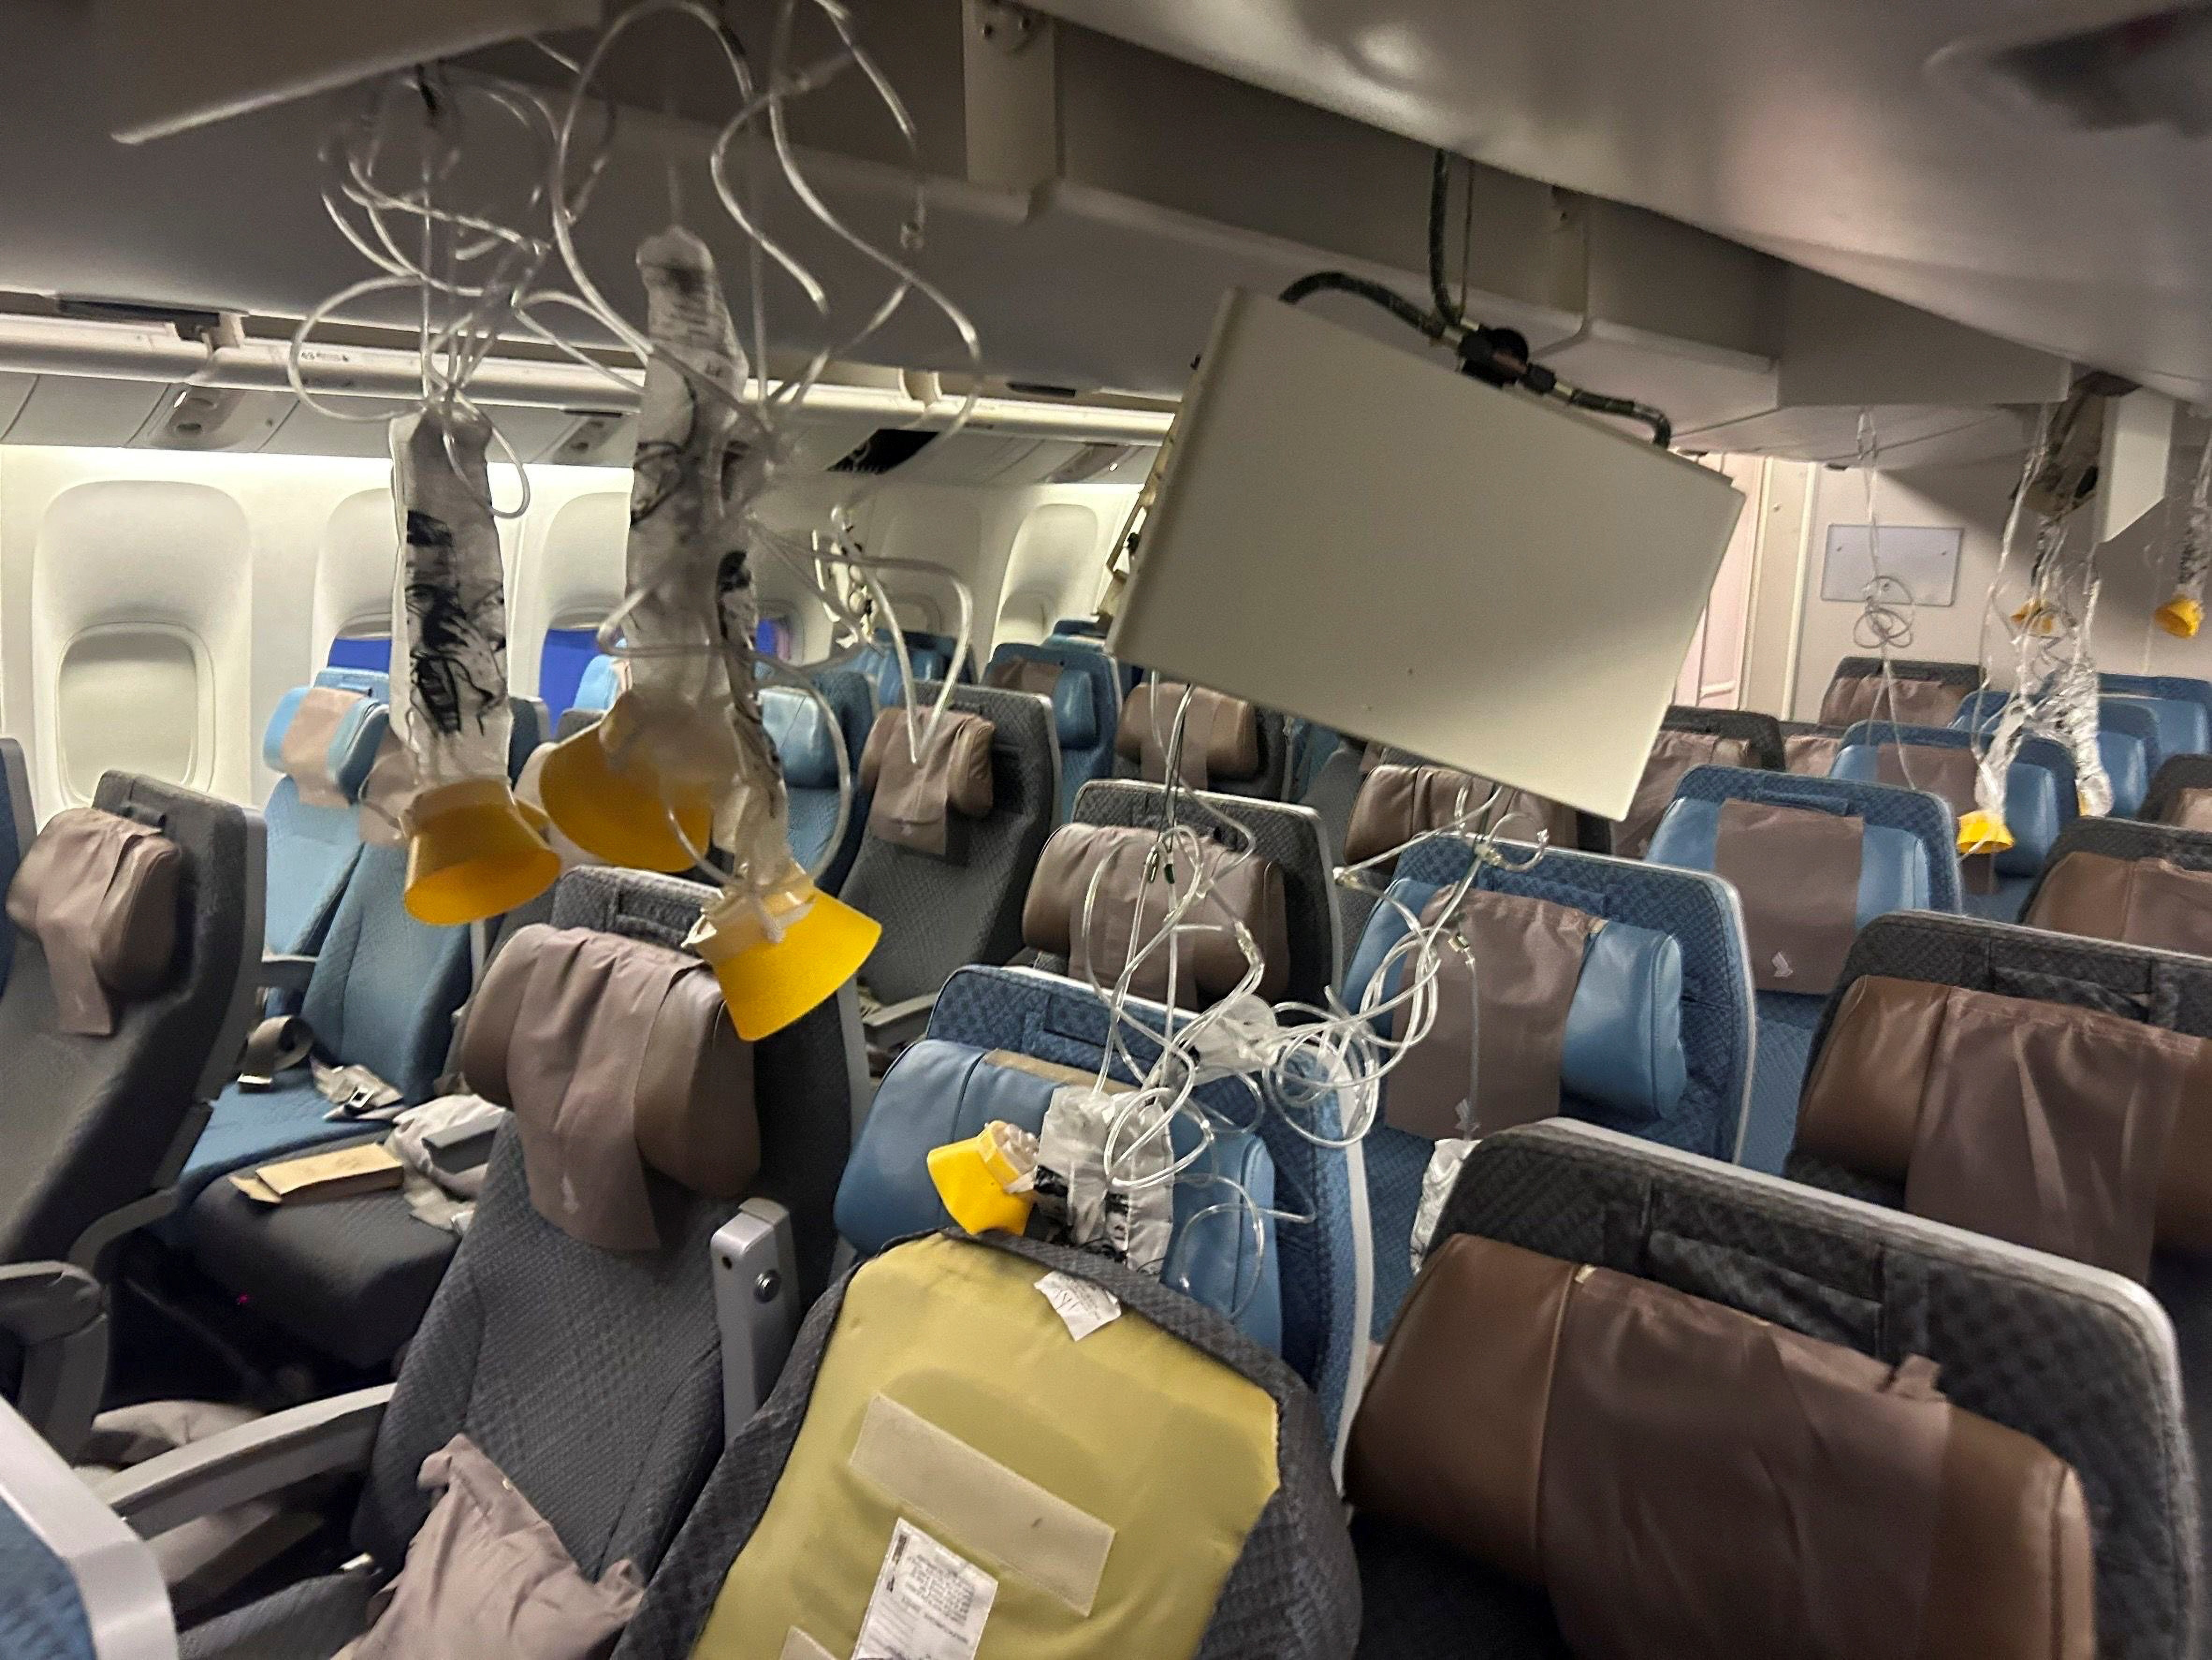 Oxygen masks that fell from the ceiling during the turbulent flight